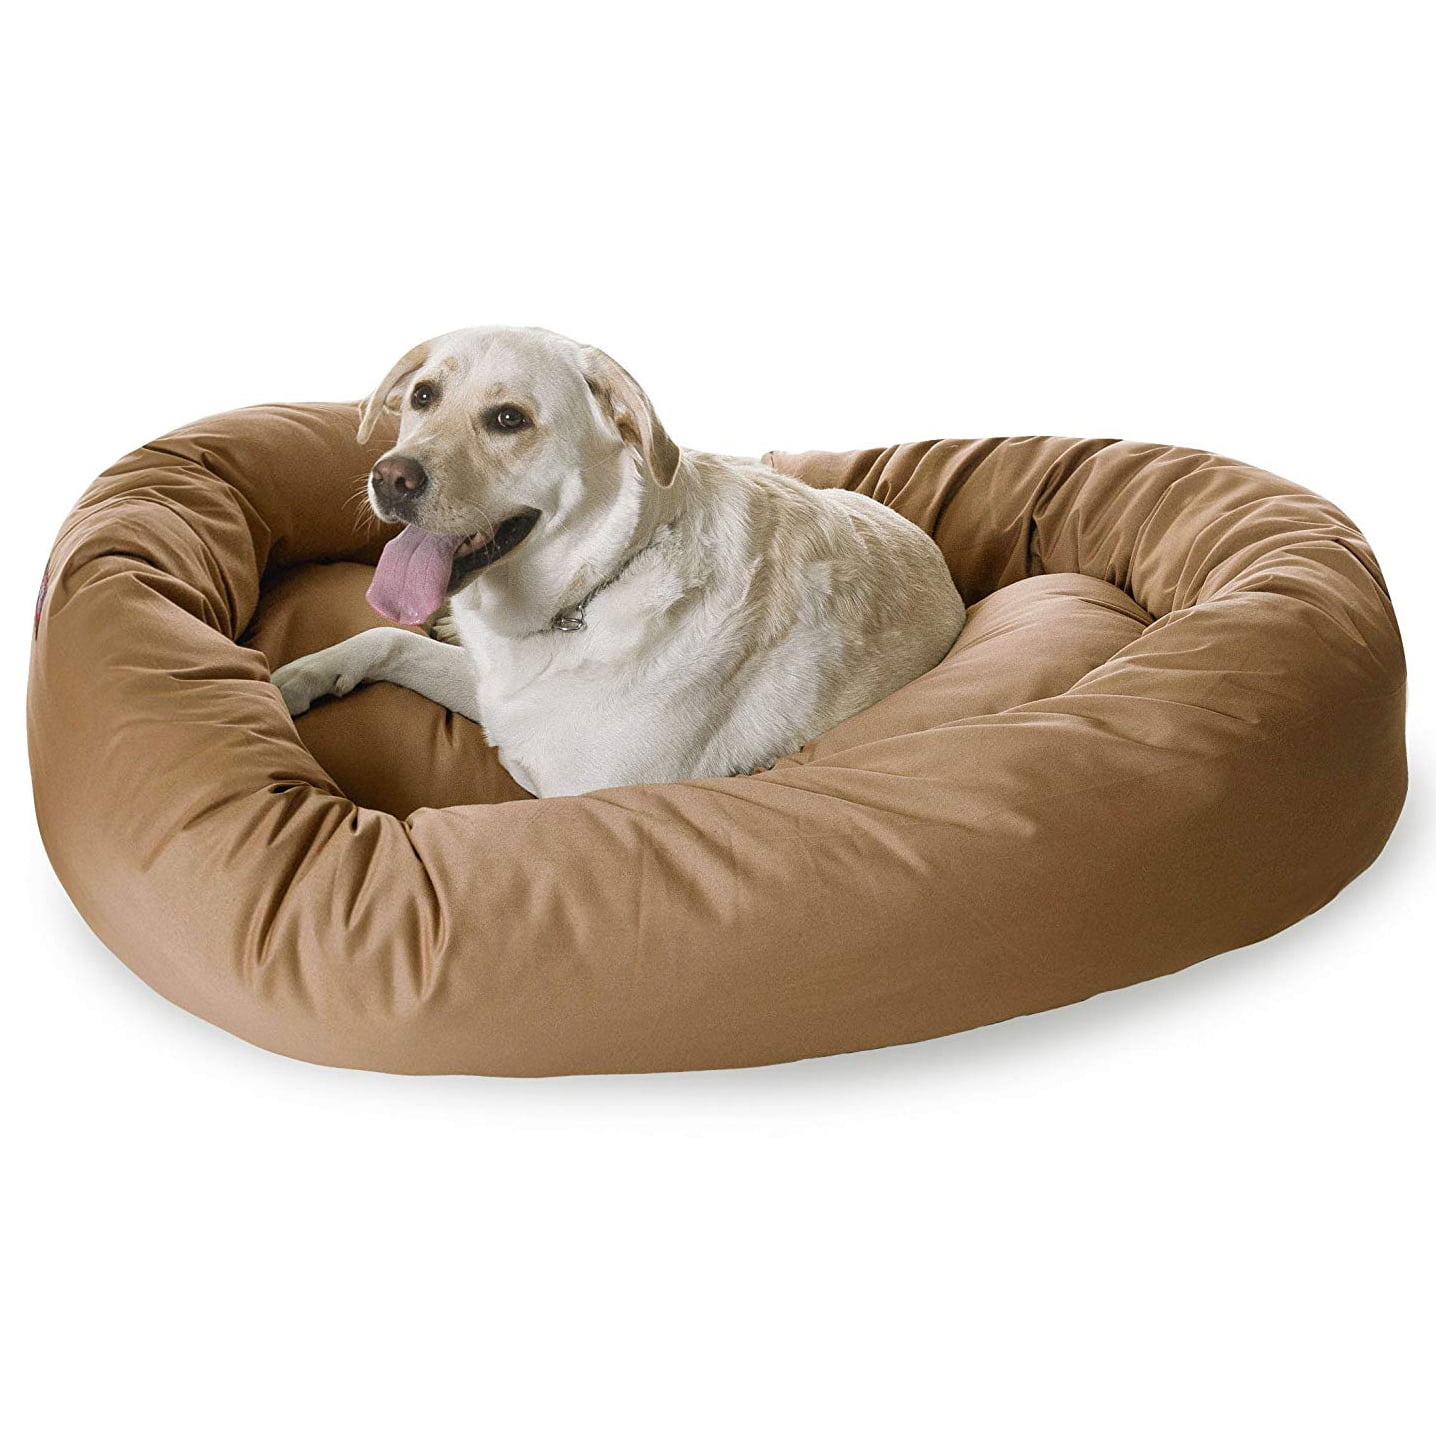 Majestic Pet | Poly/Cotton Bagel Pet Bed For Dogs, Khaki, Extra Large